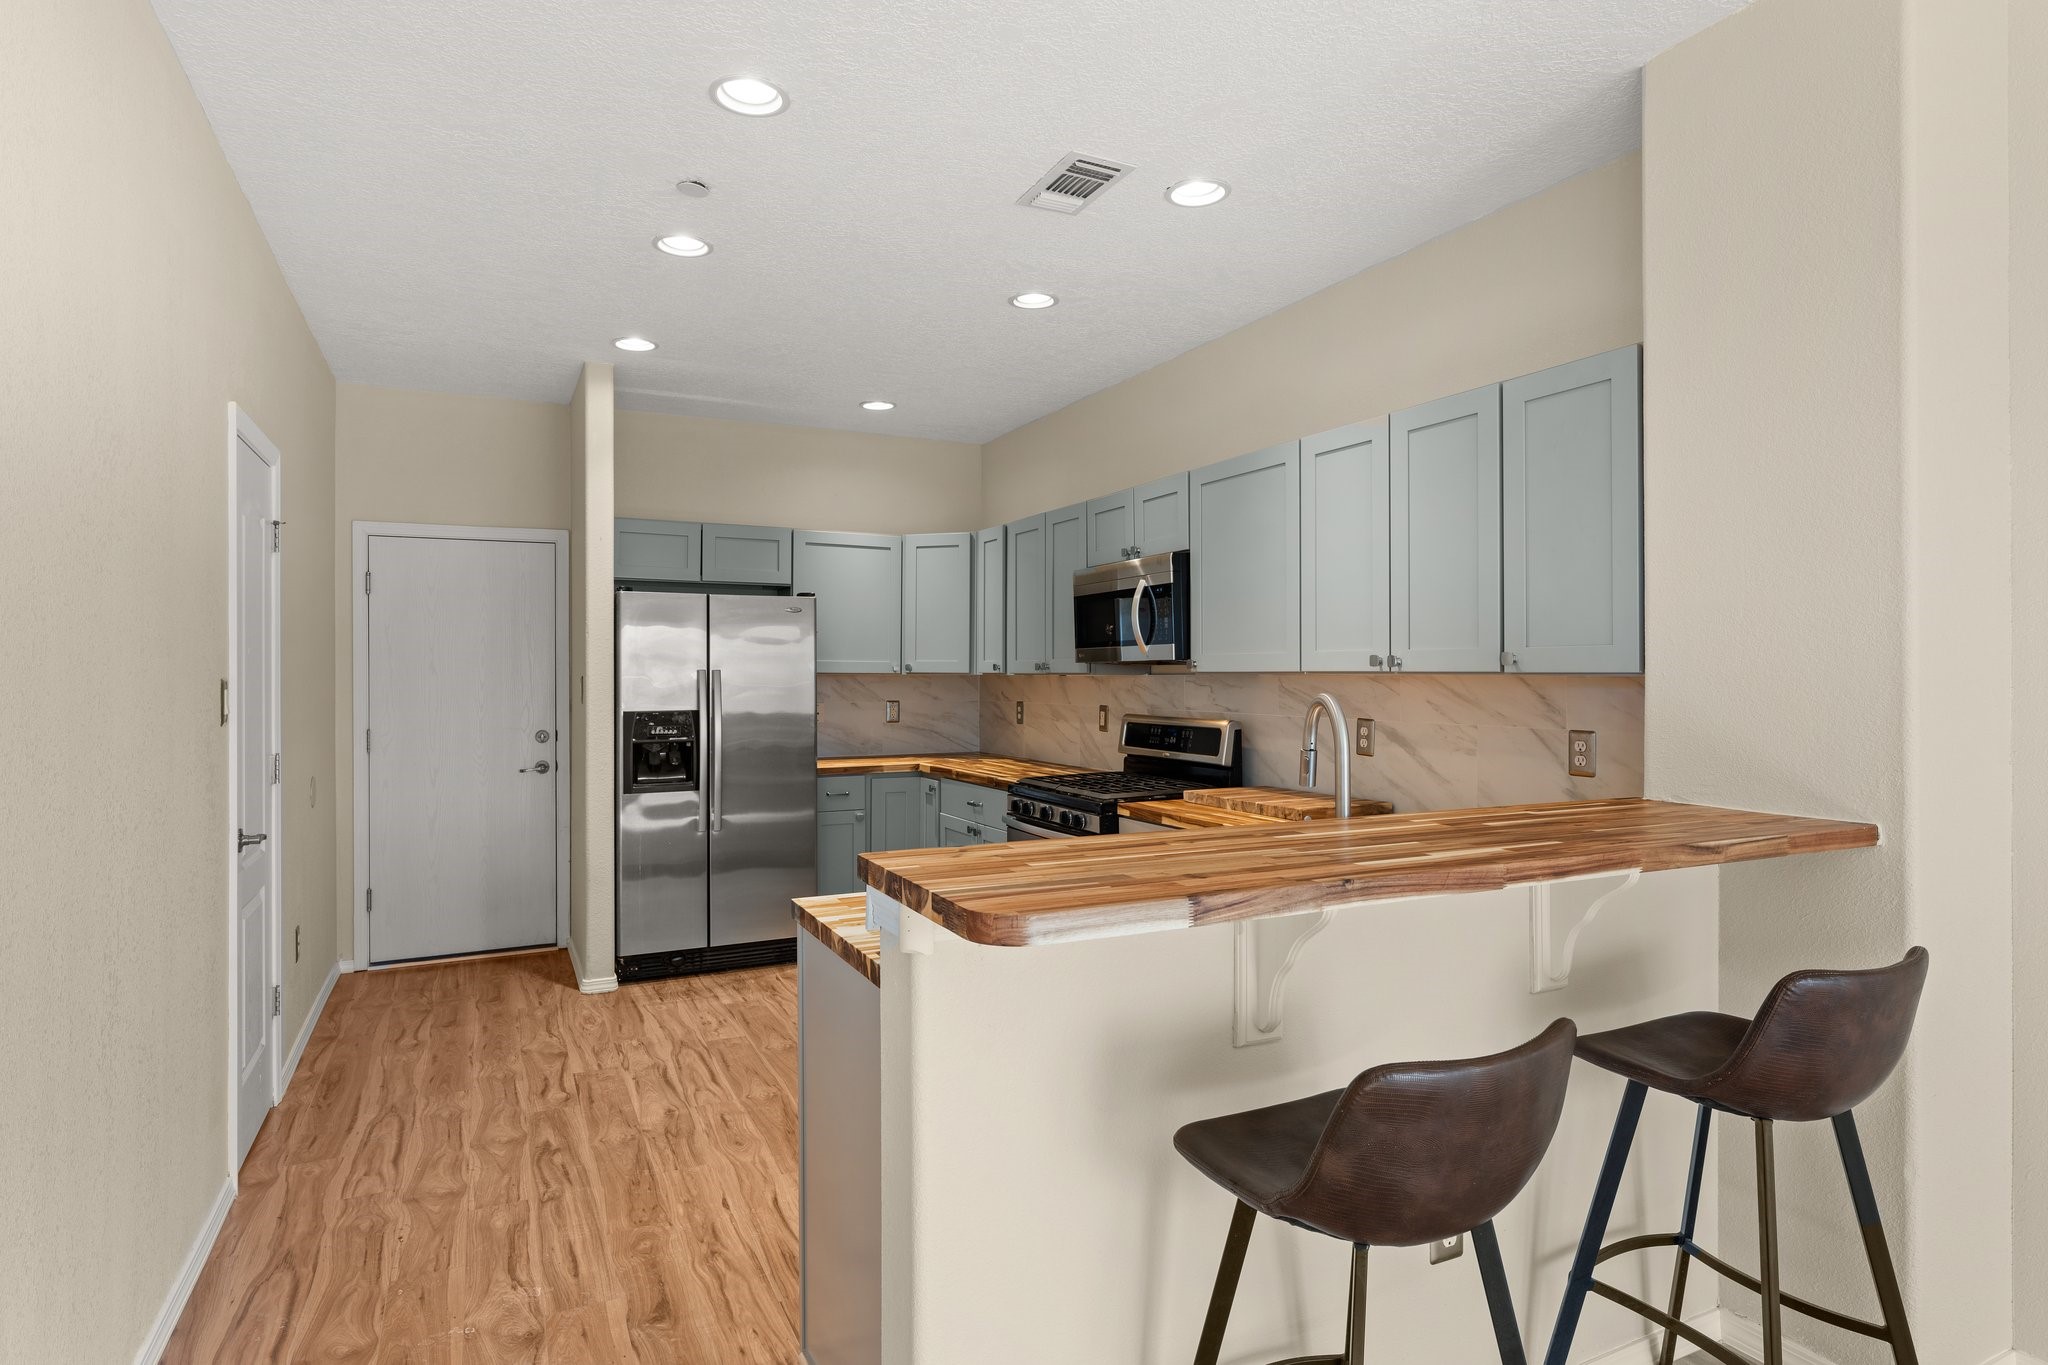 Kitchen eat-in bar, direct access to garage, pantry